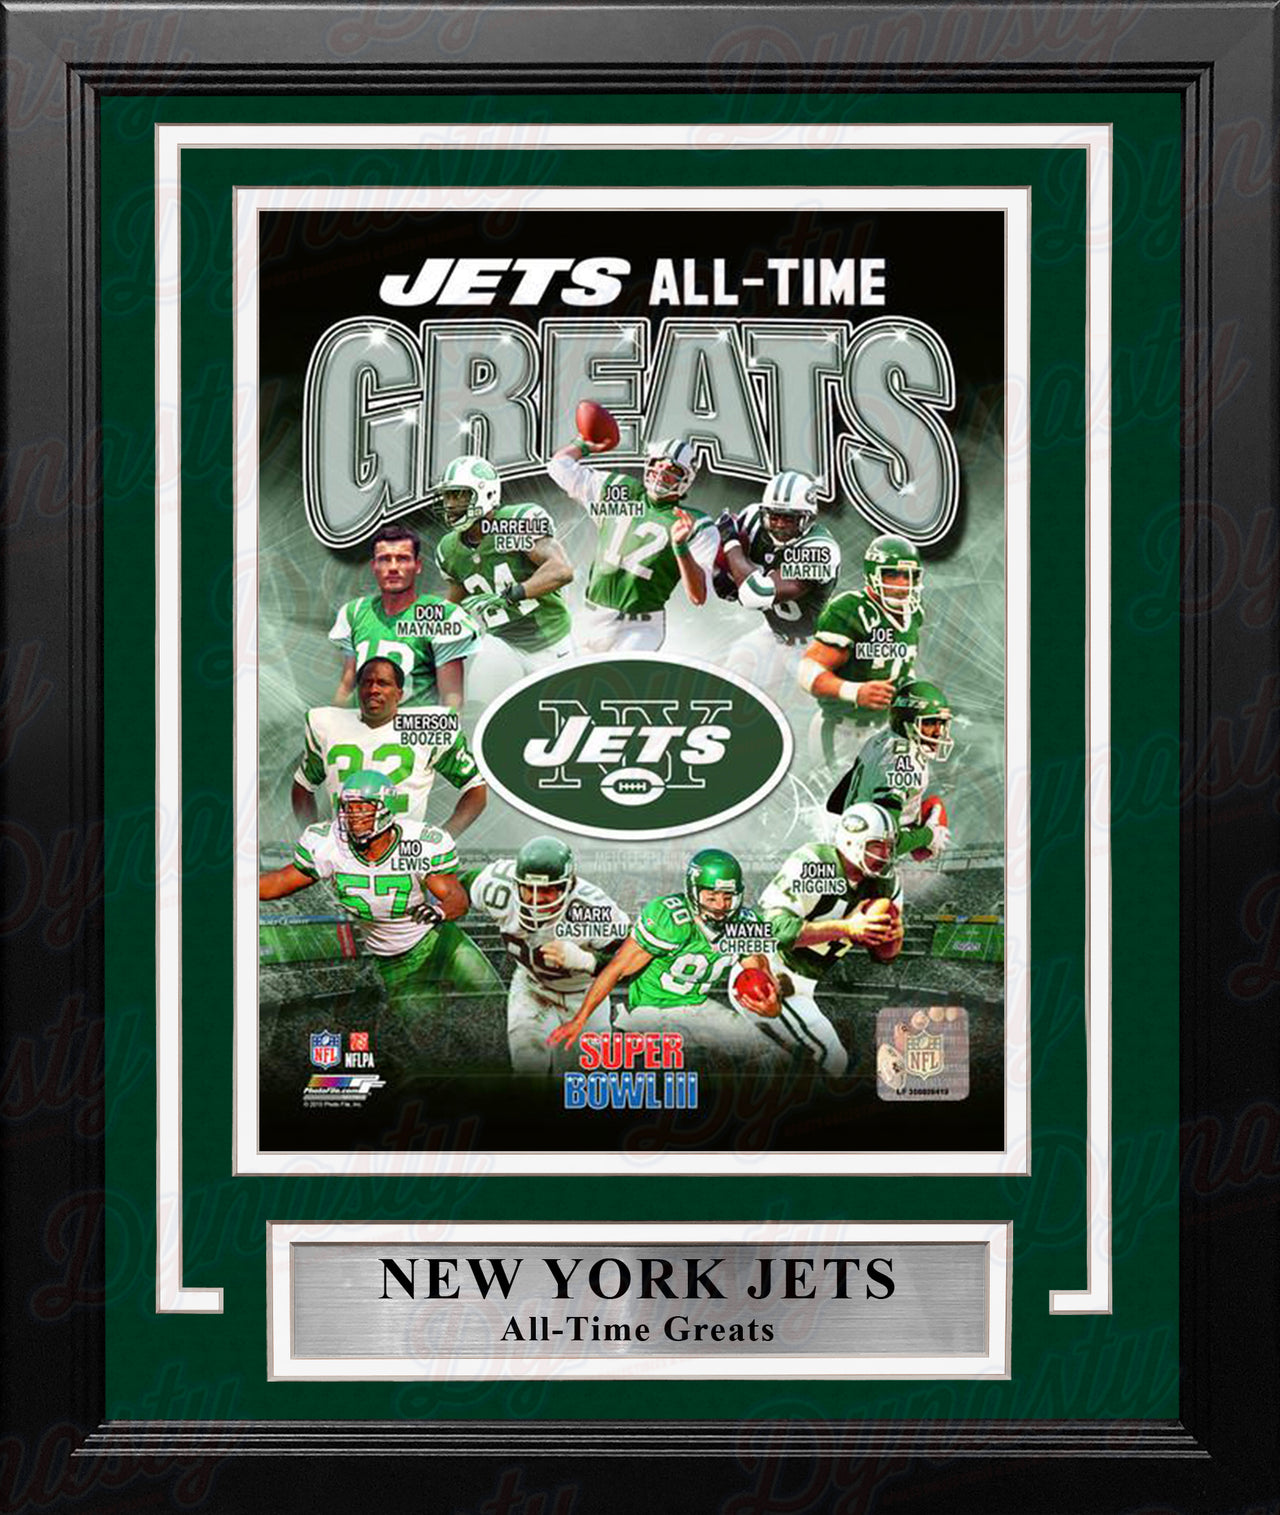 New York Jets All-Time Greats 8" x 10" Framed Football Photo - Dynasty Sports & Framing 